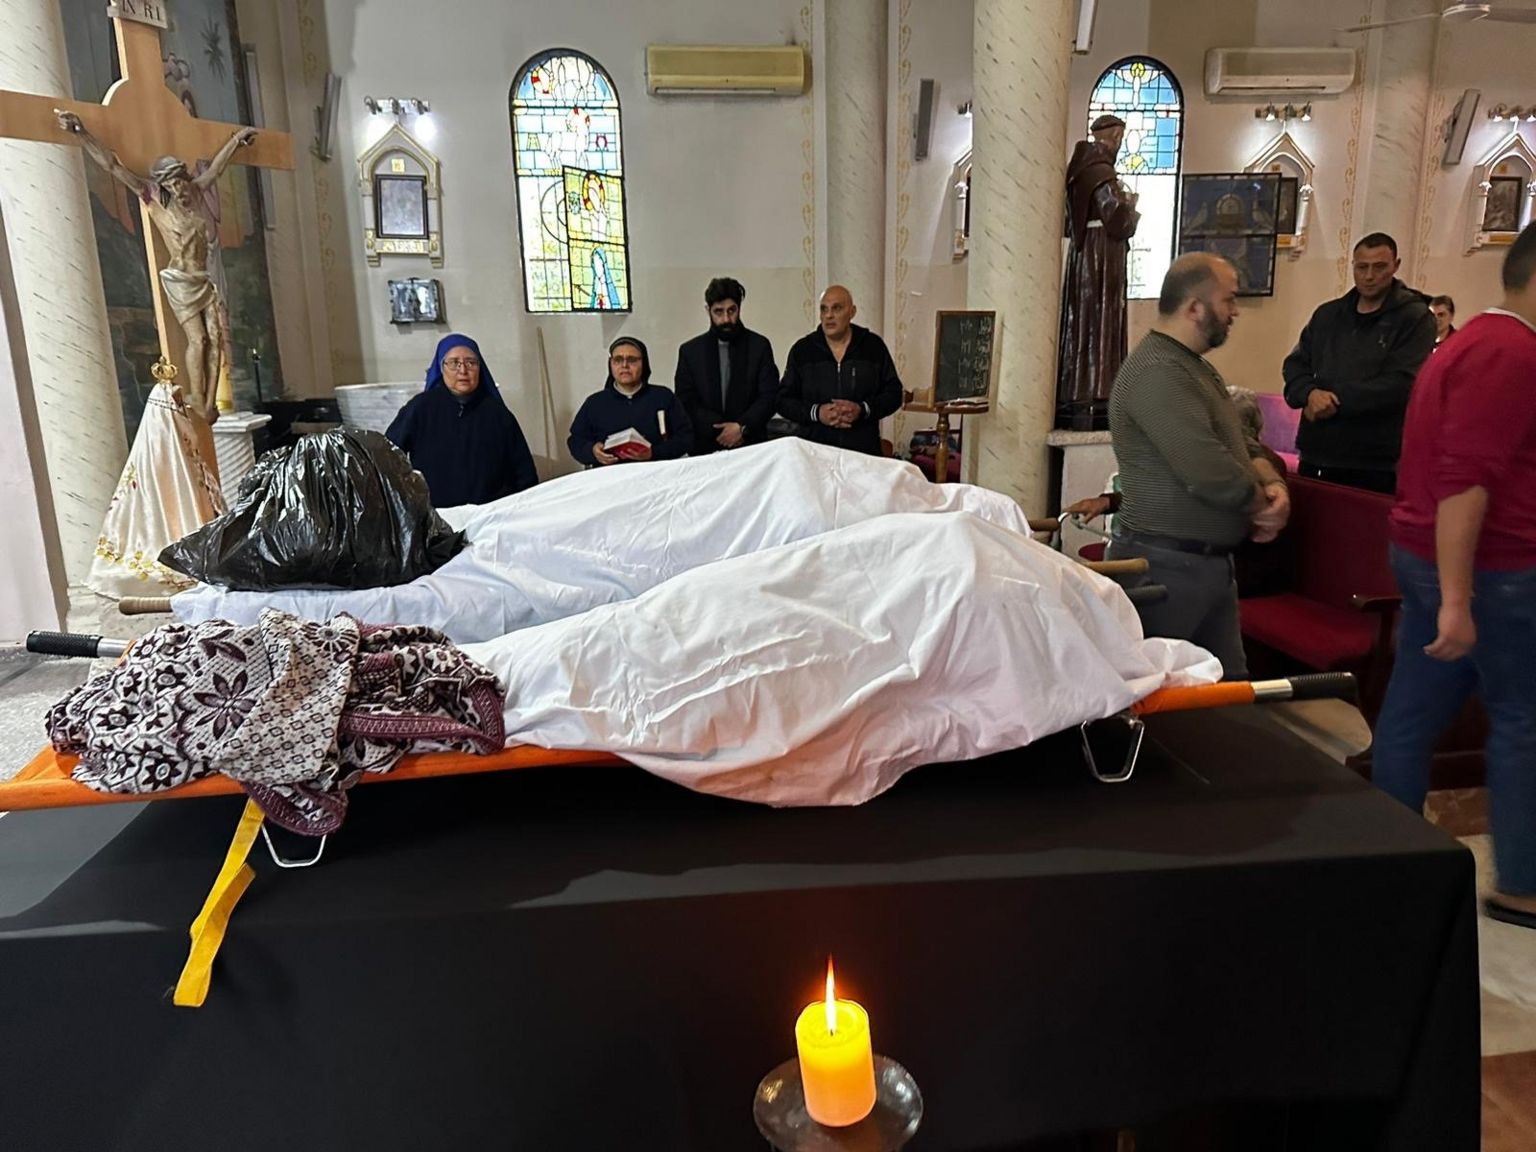 Two bodies covered in white sheets lay in a church, surrounded by people